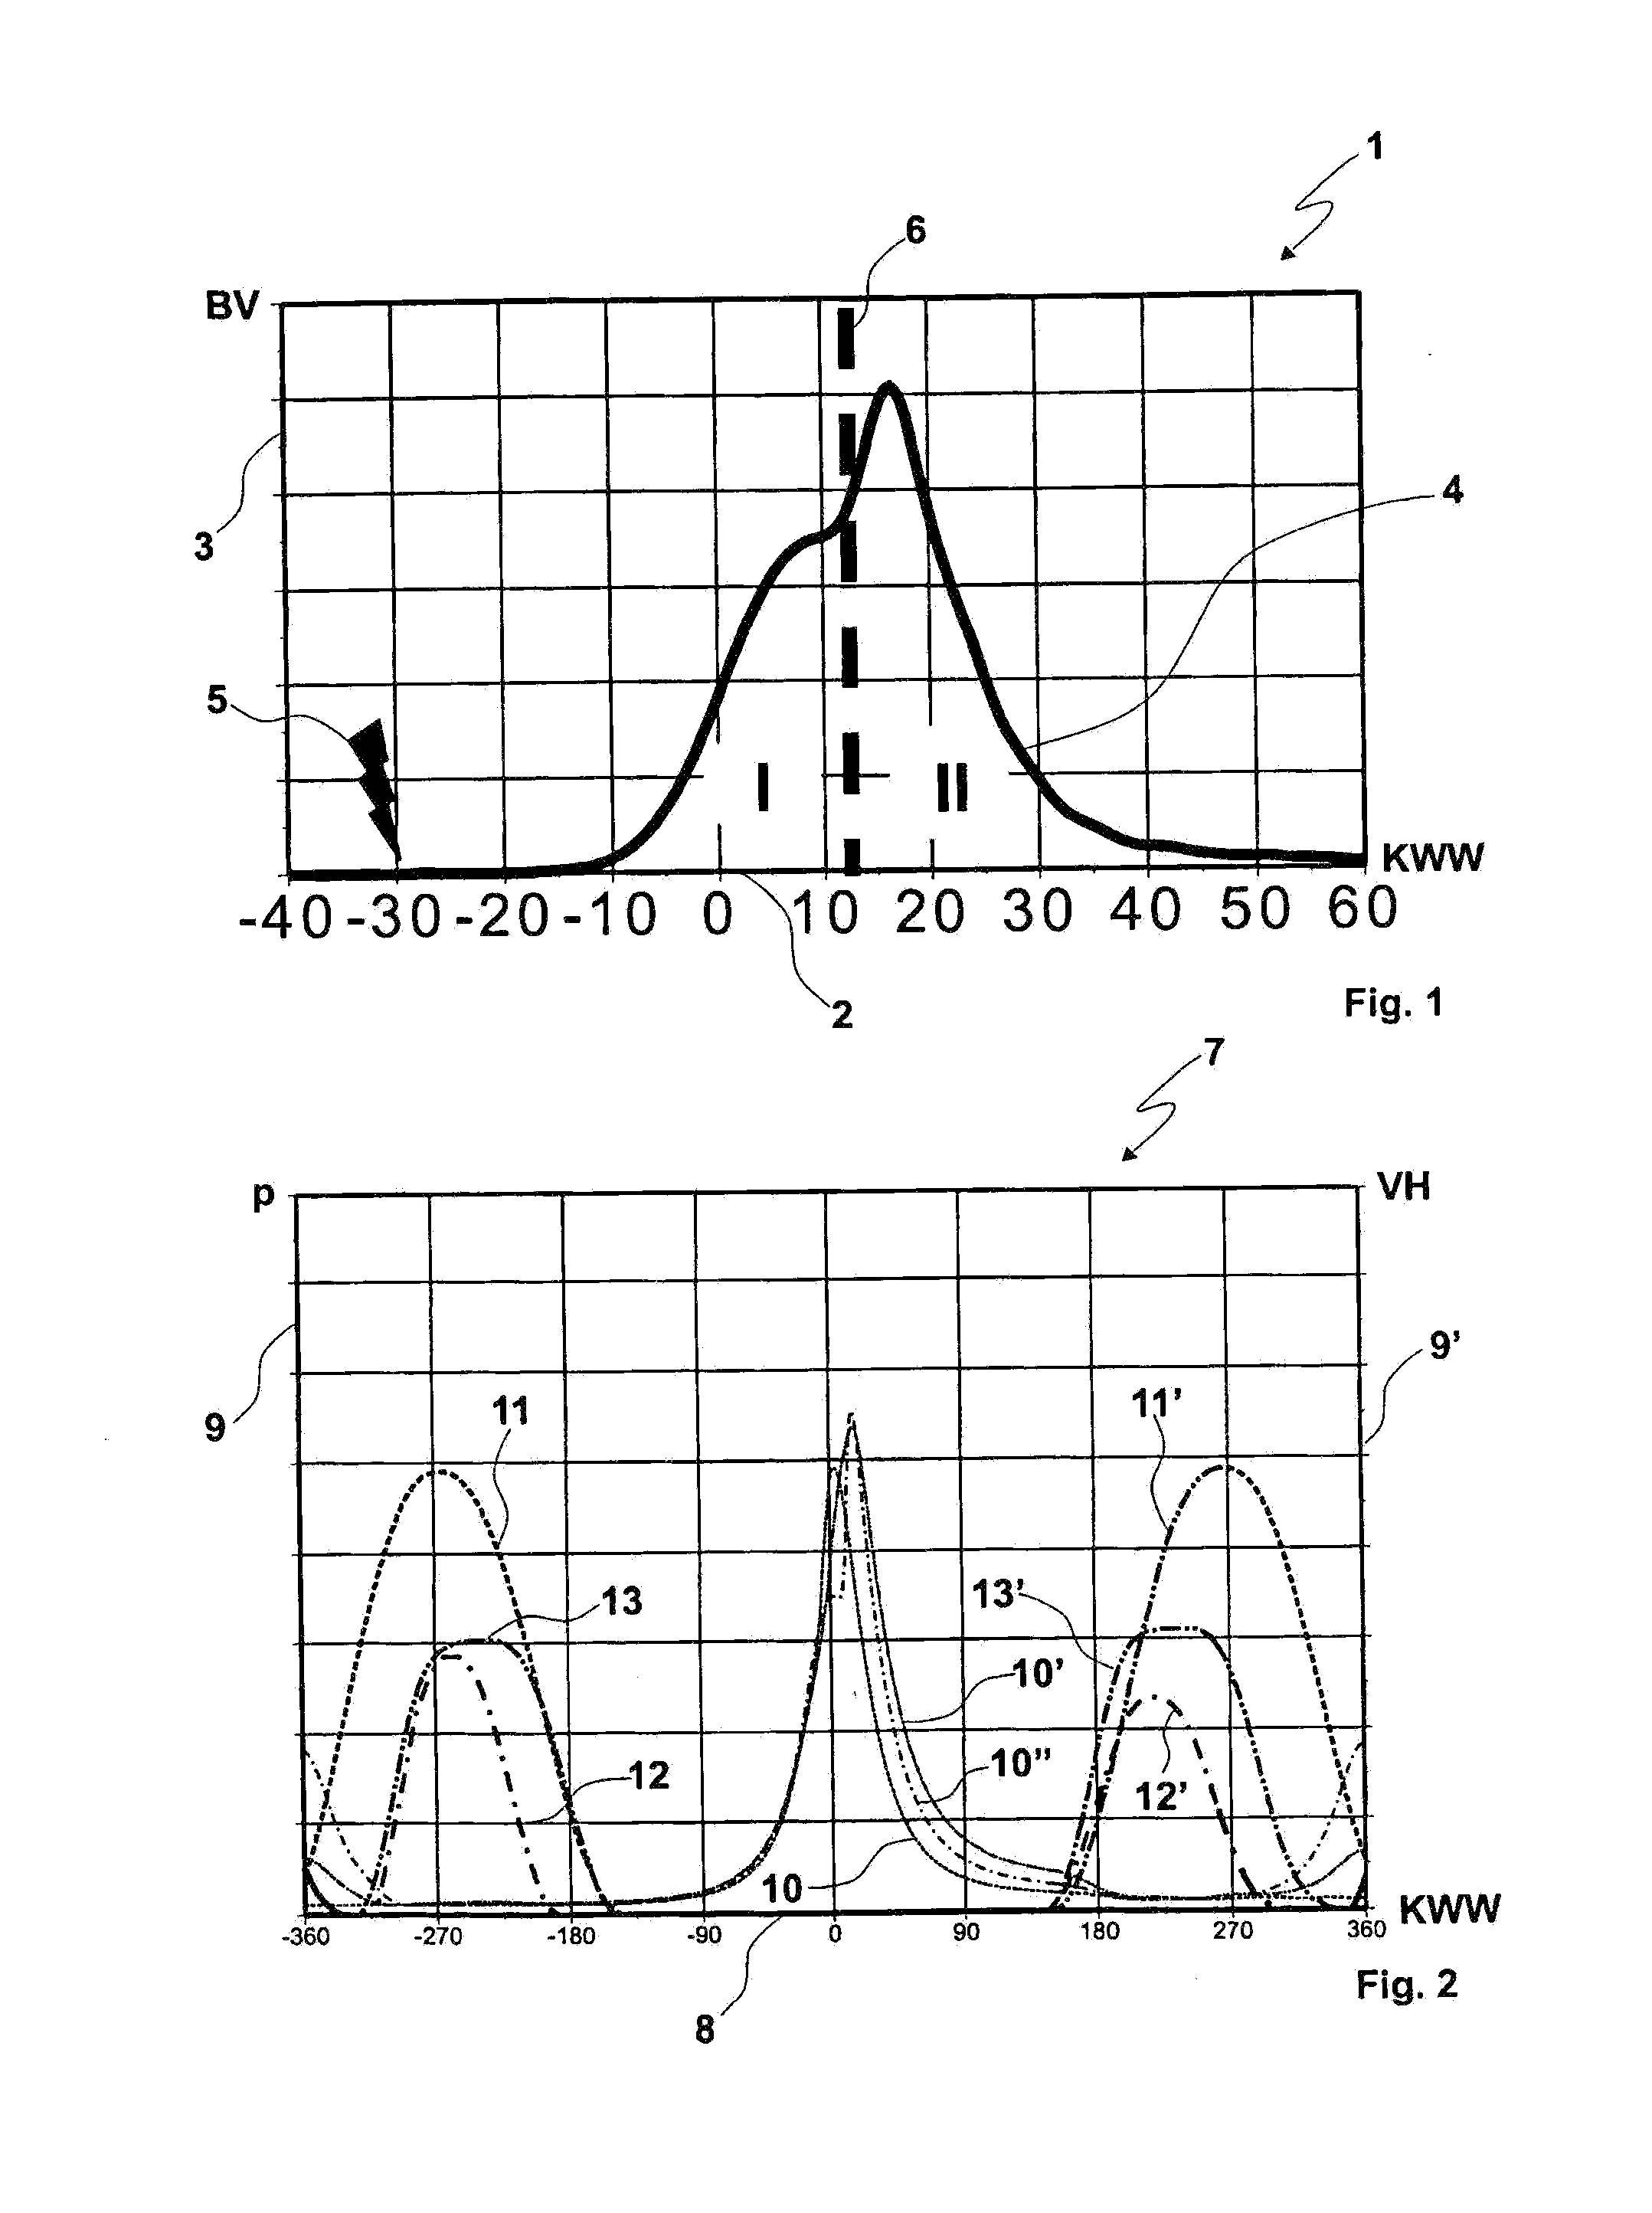 METHOD OF OPERATING AN INTERNAL COMBUSTION ENGINE WITH DIRECT FUEL INJECTION AND LOW NOx EMISSIONS